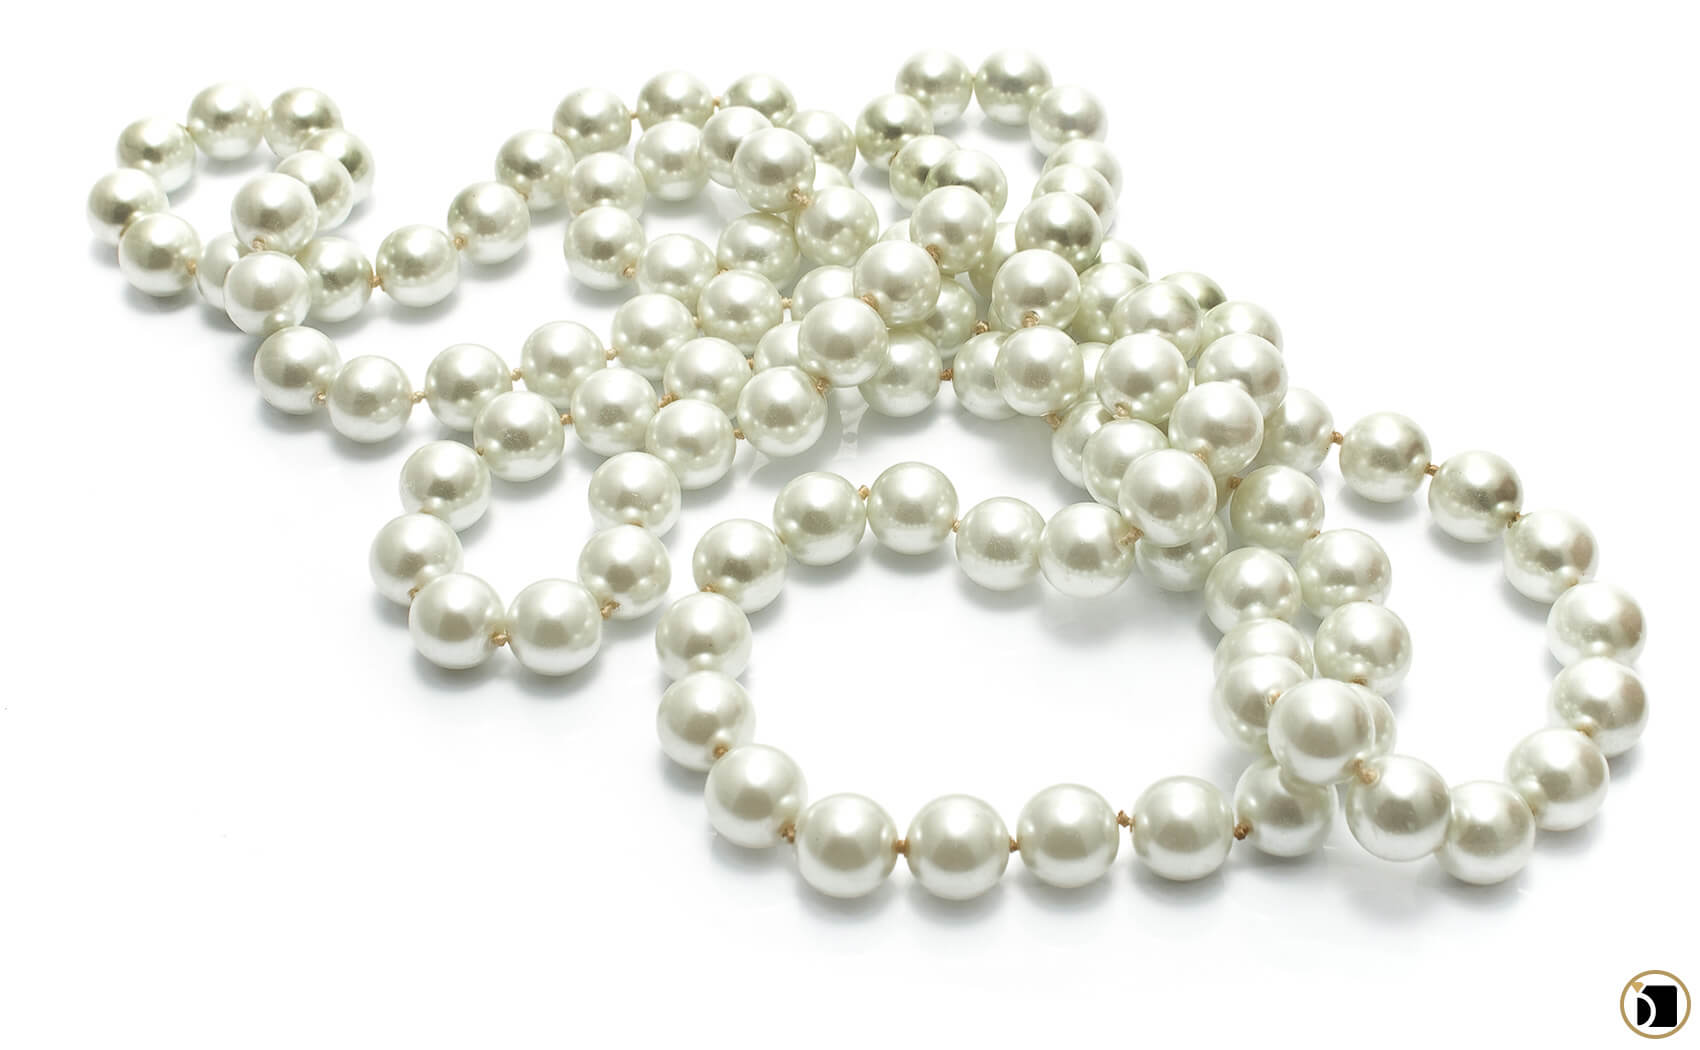 Mikimoto, The Inventor of the Cultured Pearl - MyJewelryRepair.com